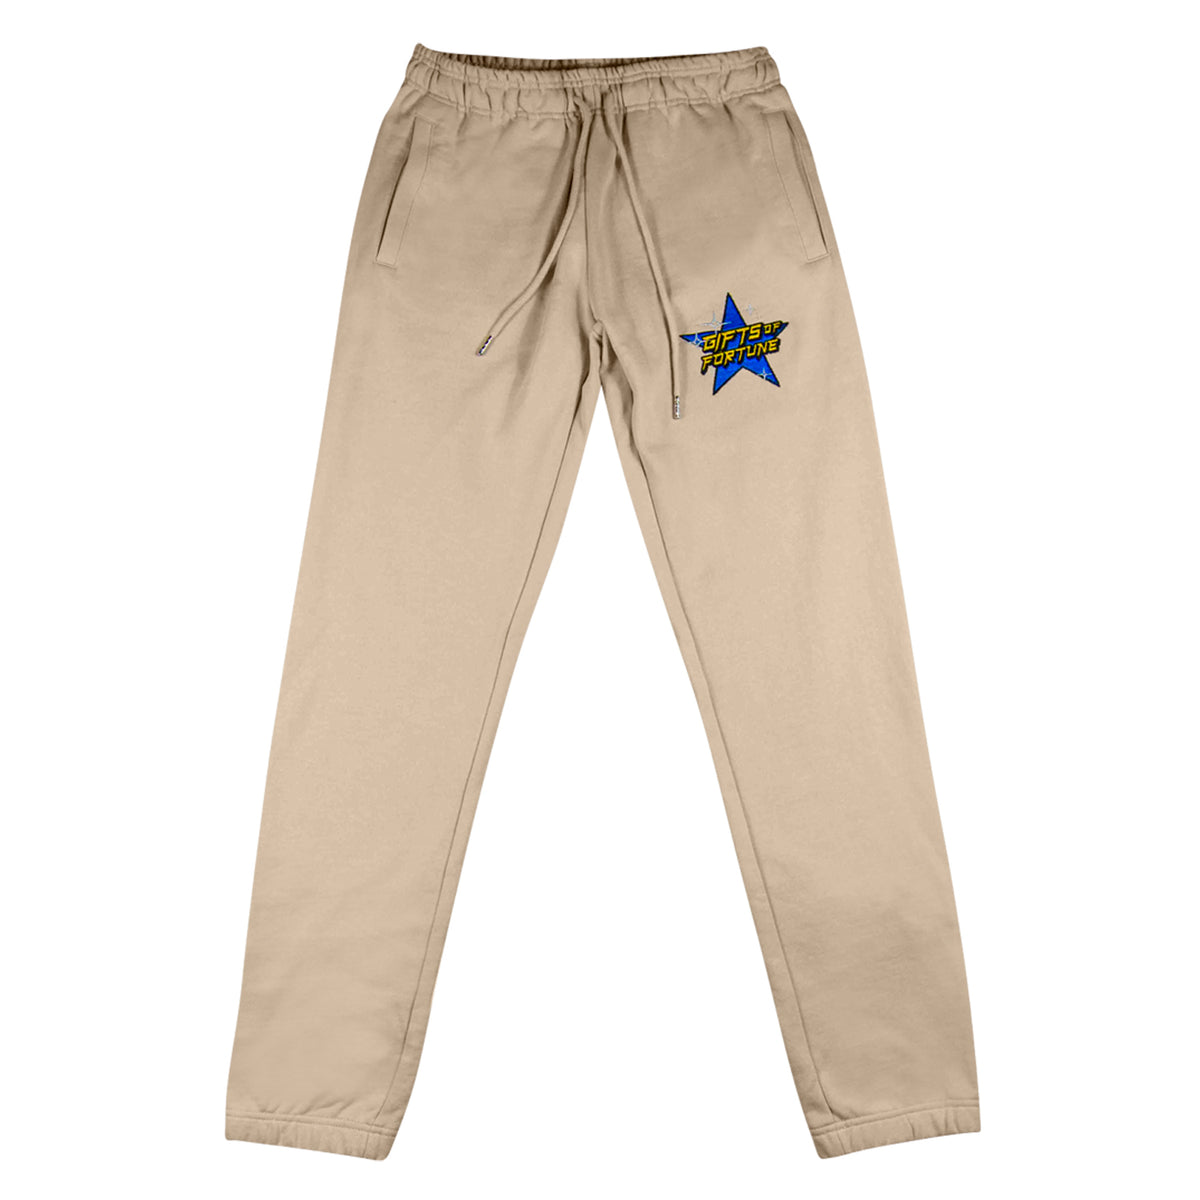 Out Of This World Sweatpants | Tan